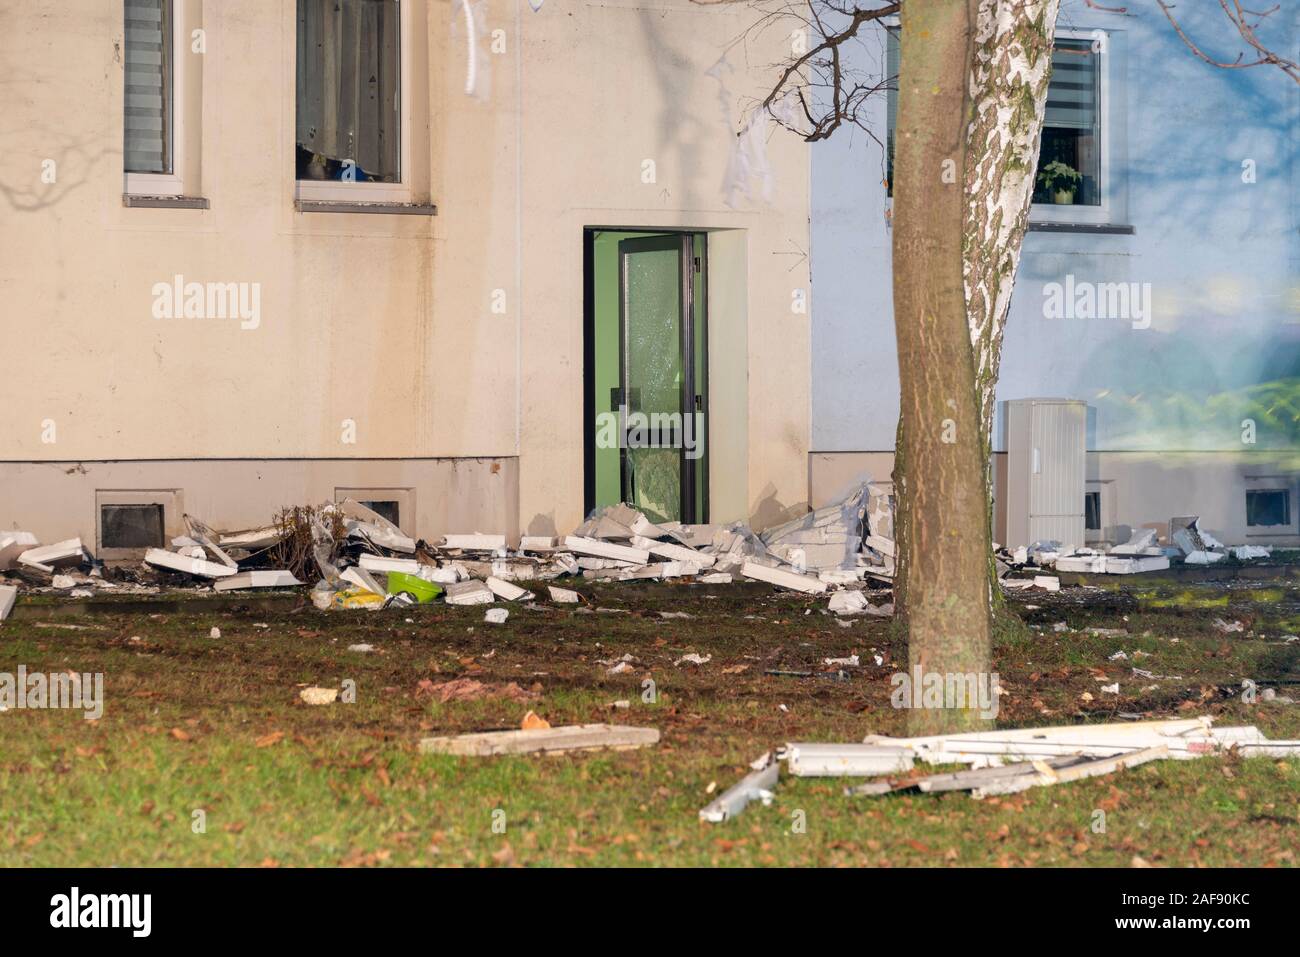 Blankenburg, Germany. 13th Dec, 2019. In front of the door of a multiple dwelling in Blankenburg in the Harz lies rubble after a heavy explosion. A 78-year-old man died in the accident, and several people were injured, some of them seriously. According to police, the dead man had heated his apartment with propane gas, which was forbidden. The explosion was probably caused by a technical error or improper condition. Credit: Mattis Kaminer/Alamy Live News Stock Photo